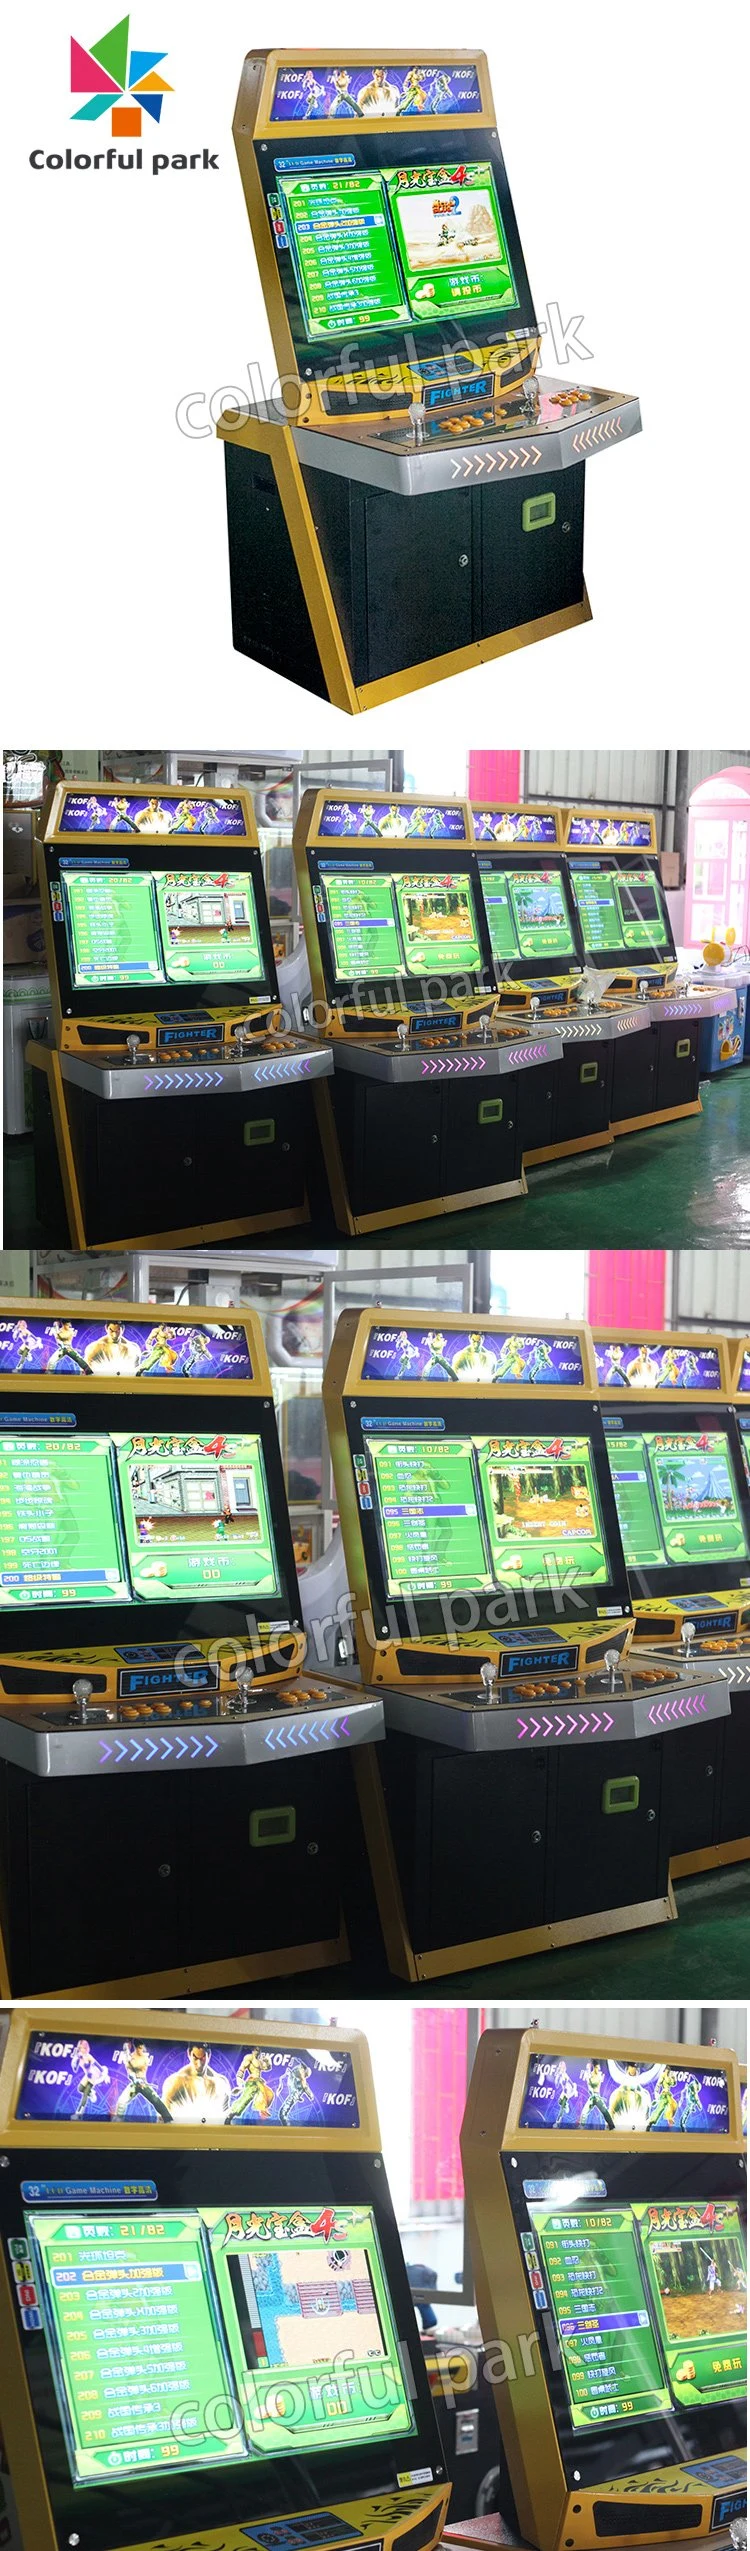 Colorful Park Classical Game Boy Fighters Coin Operated Video Arcade Fighting Game Machine Wholesale Arcade Machines